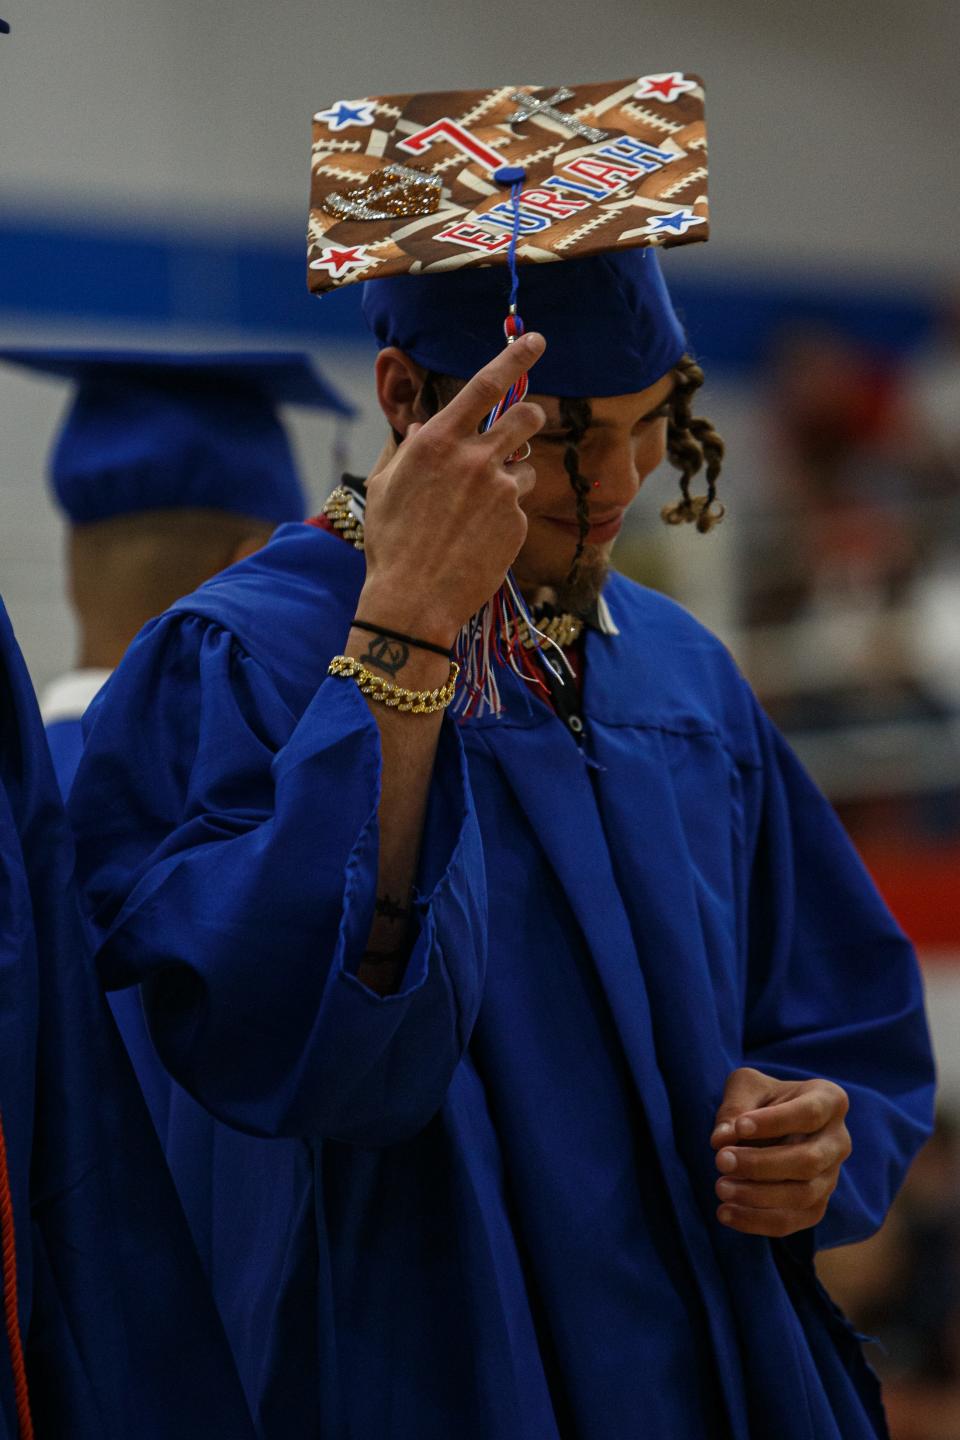 Mount Pleasant High School graduation takes place in Mount Pleasant, Tenn. on May 19, 2023. Football player Euriah Archibald adjusts the tassel on his graduation hat at the ceremony in the school gym.